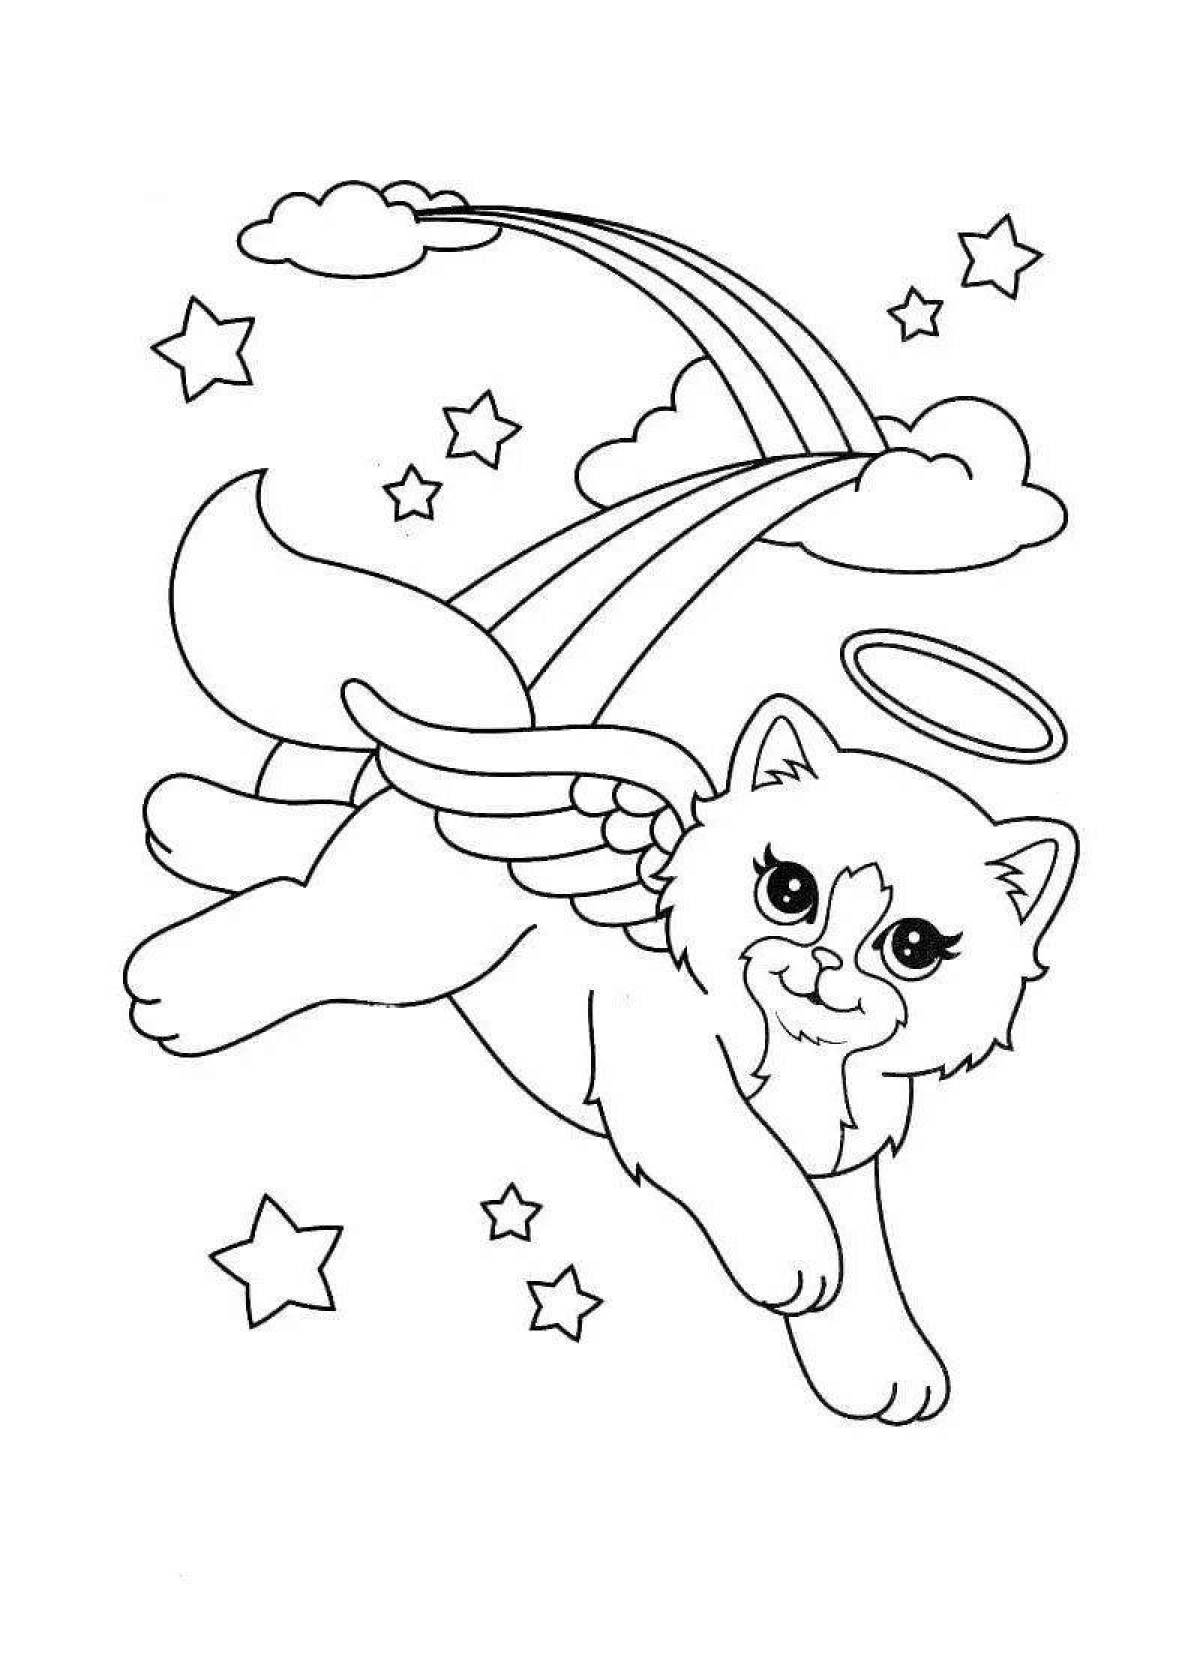 Felicity shining rainbow cat coloring page